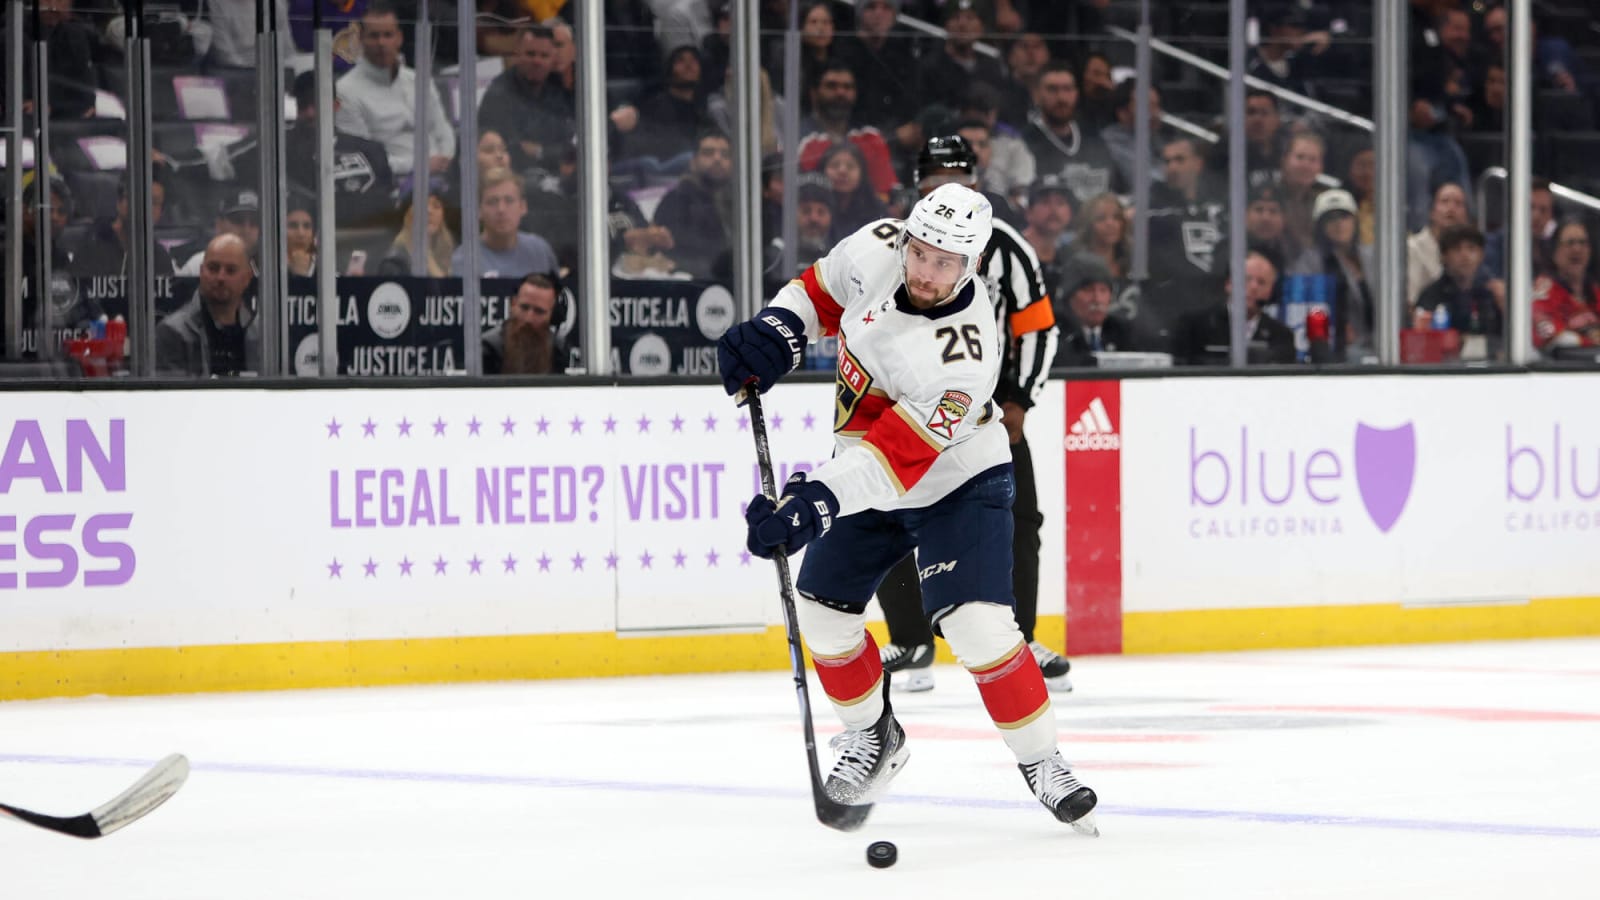 Uvis Balinskis Gets New Contract, Staying with Florida Panthers